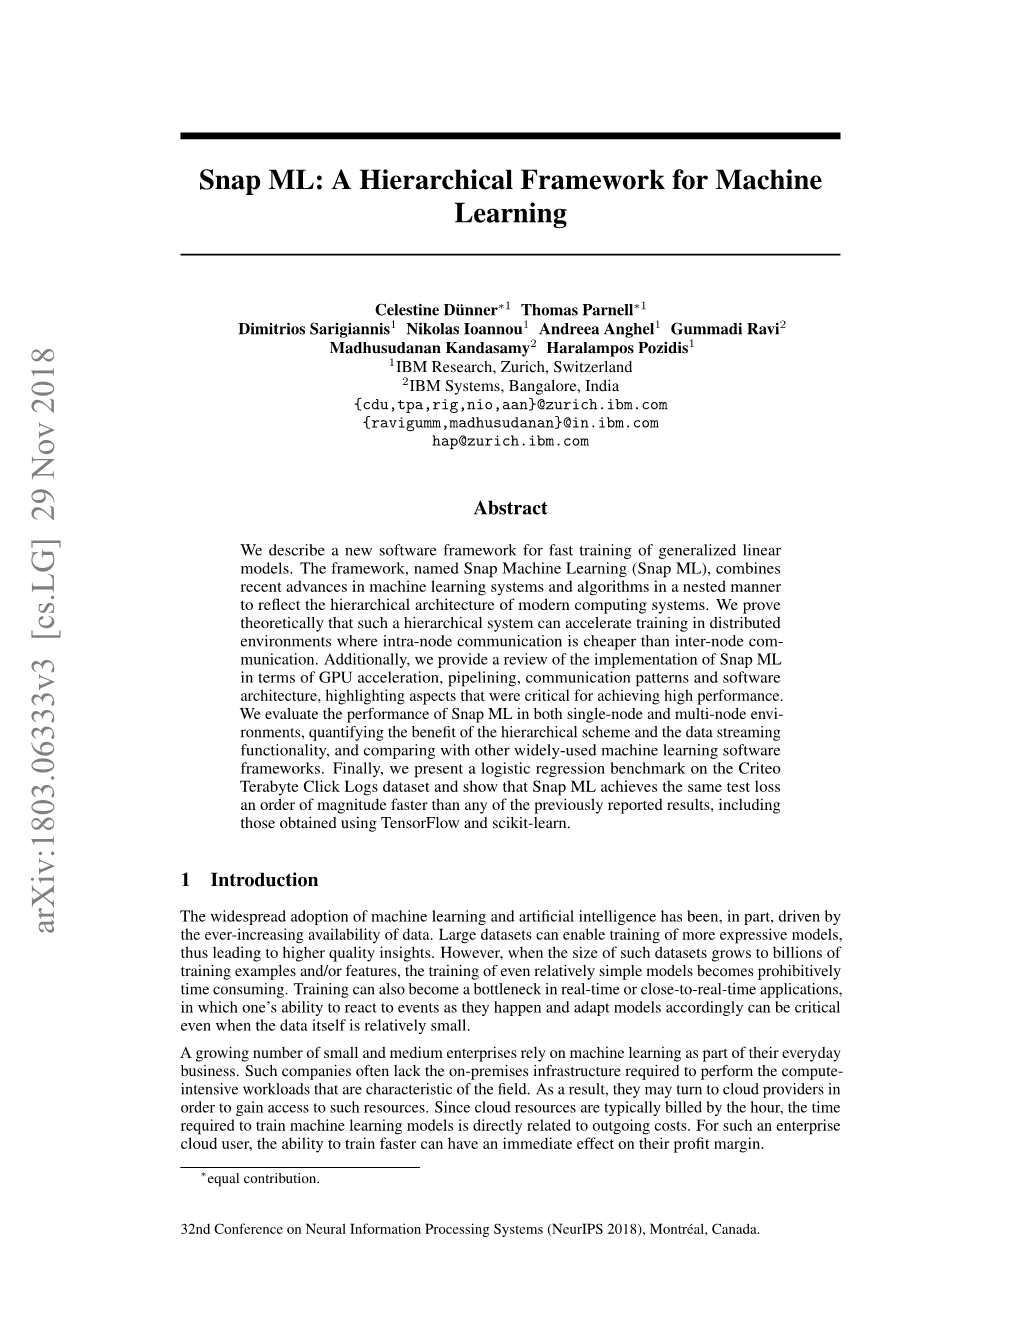 Snap ML: a Hierarchical Framework for Machine Learning